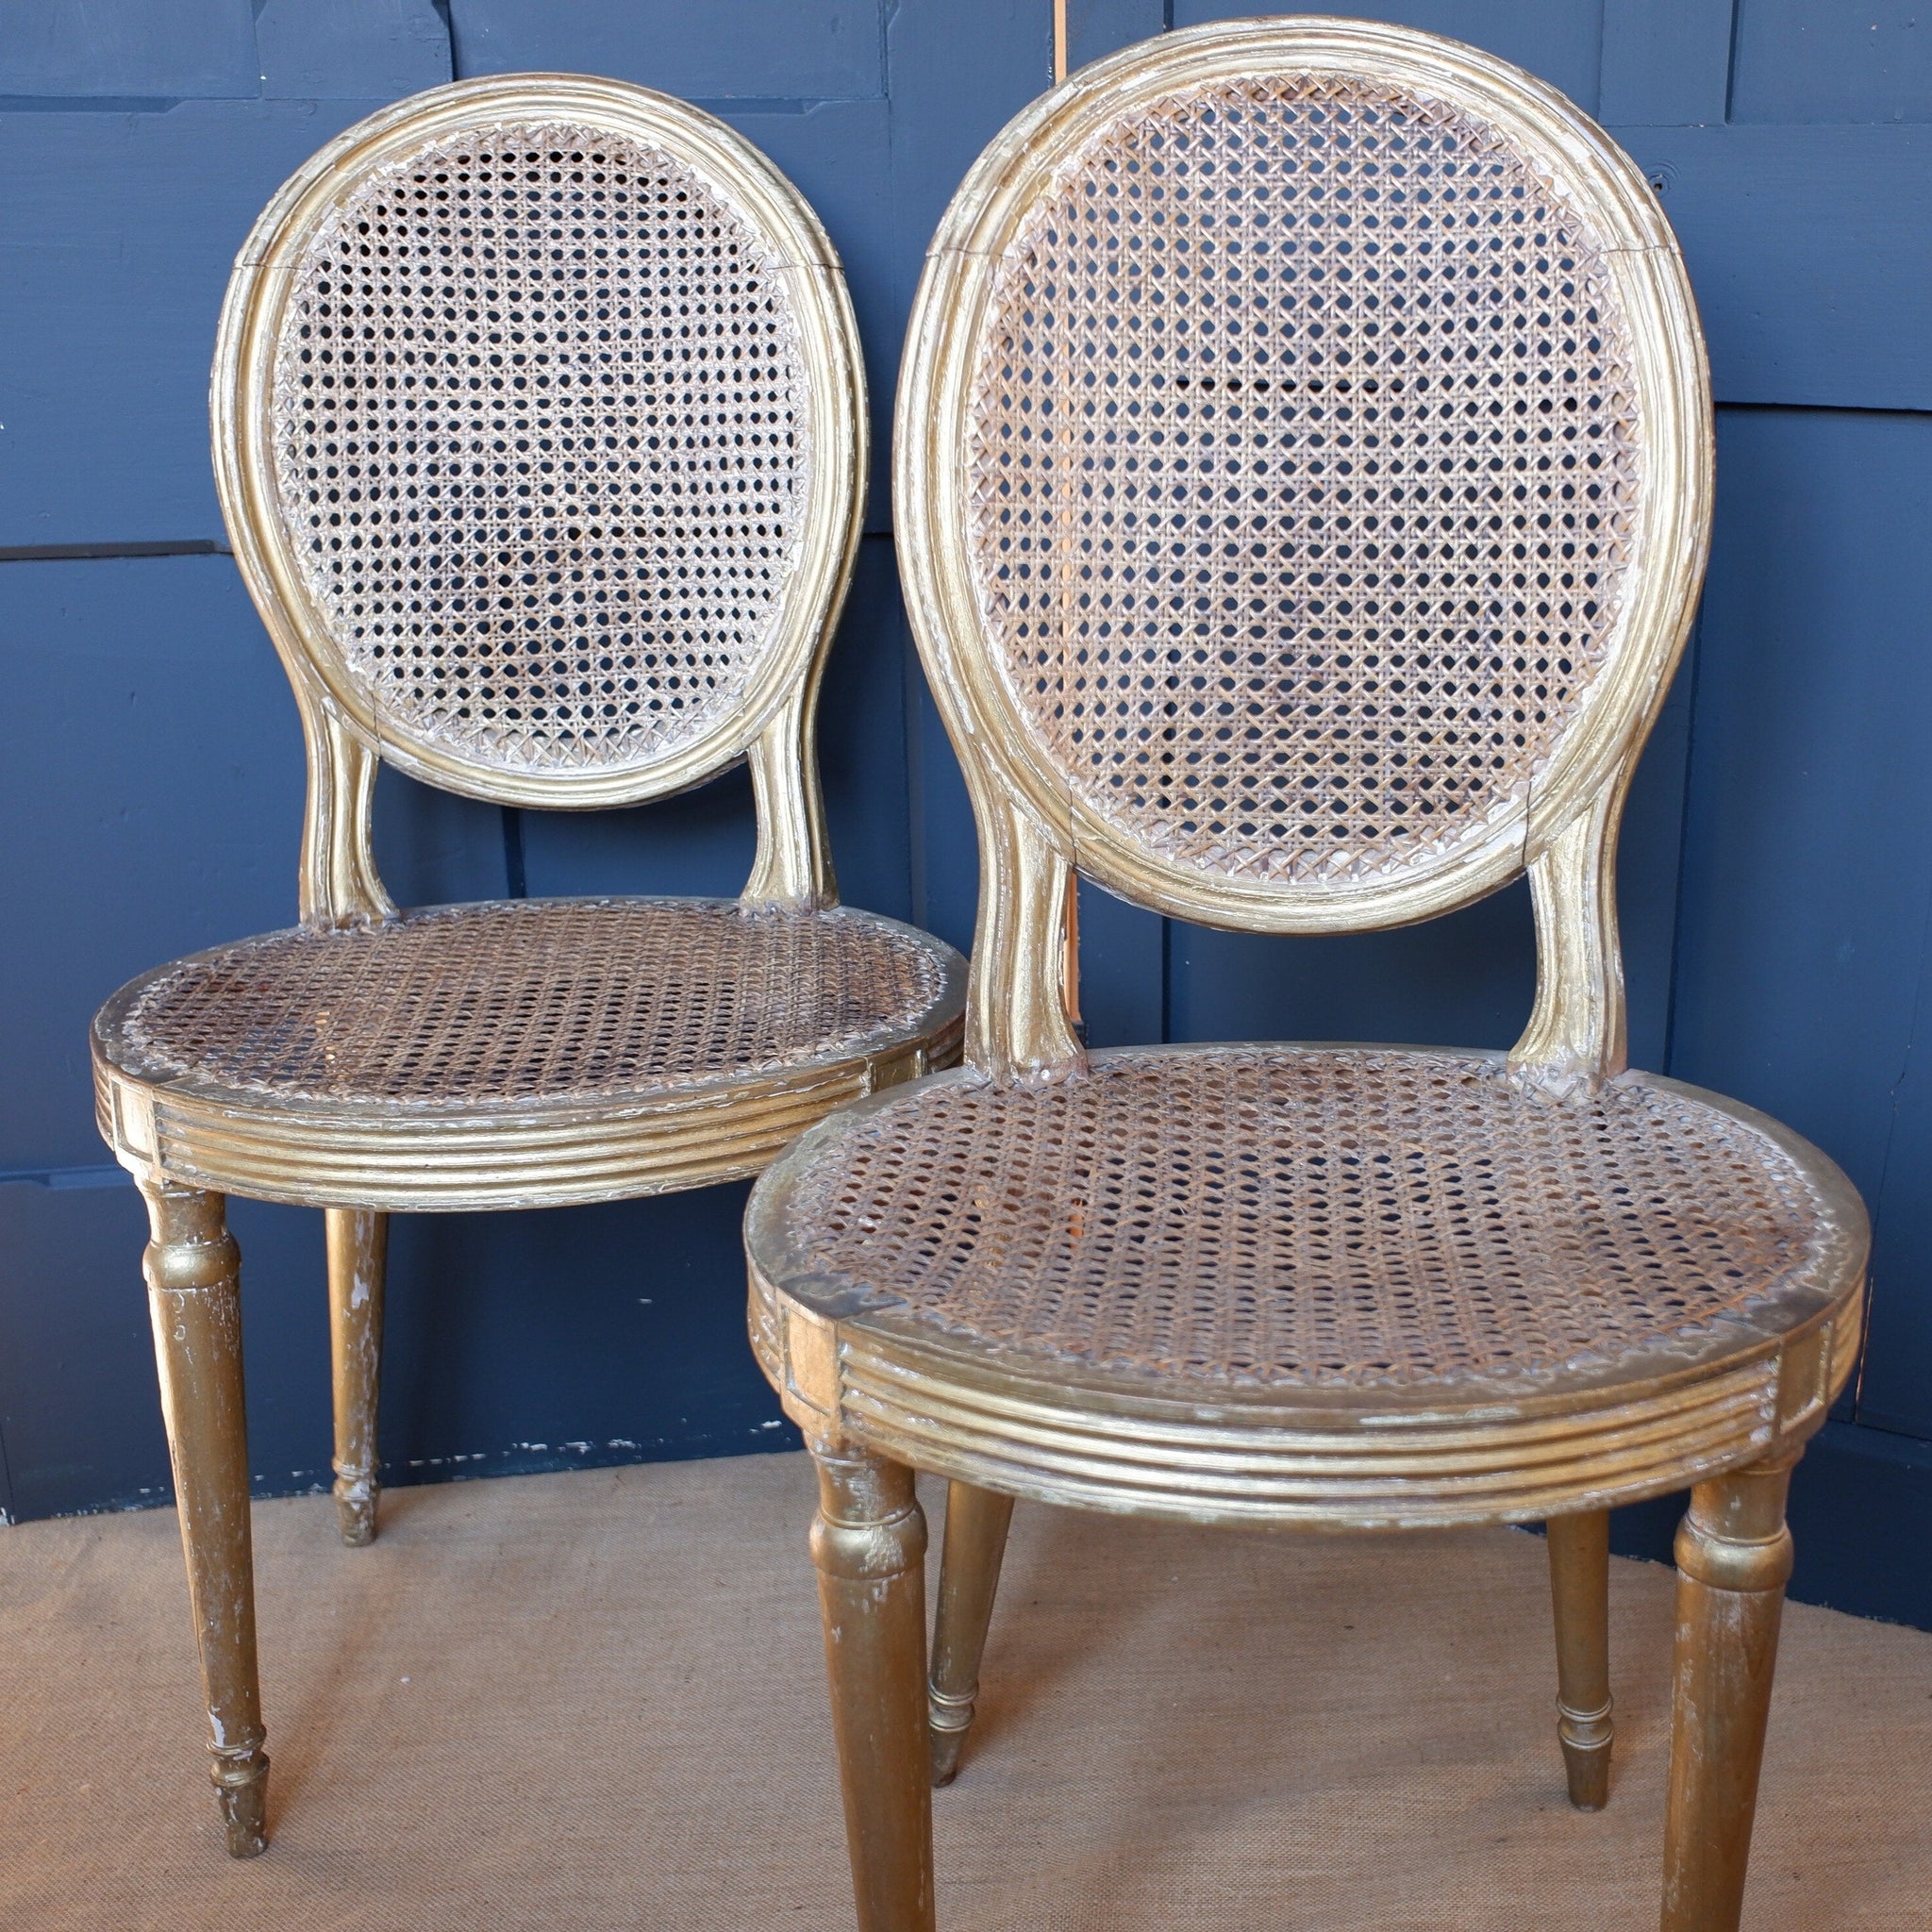 Pair of Antique FRENCH Louis GOLD Gilt Cane Shabby Chic Hall Boudoir Side Chairs